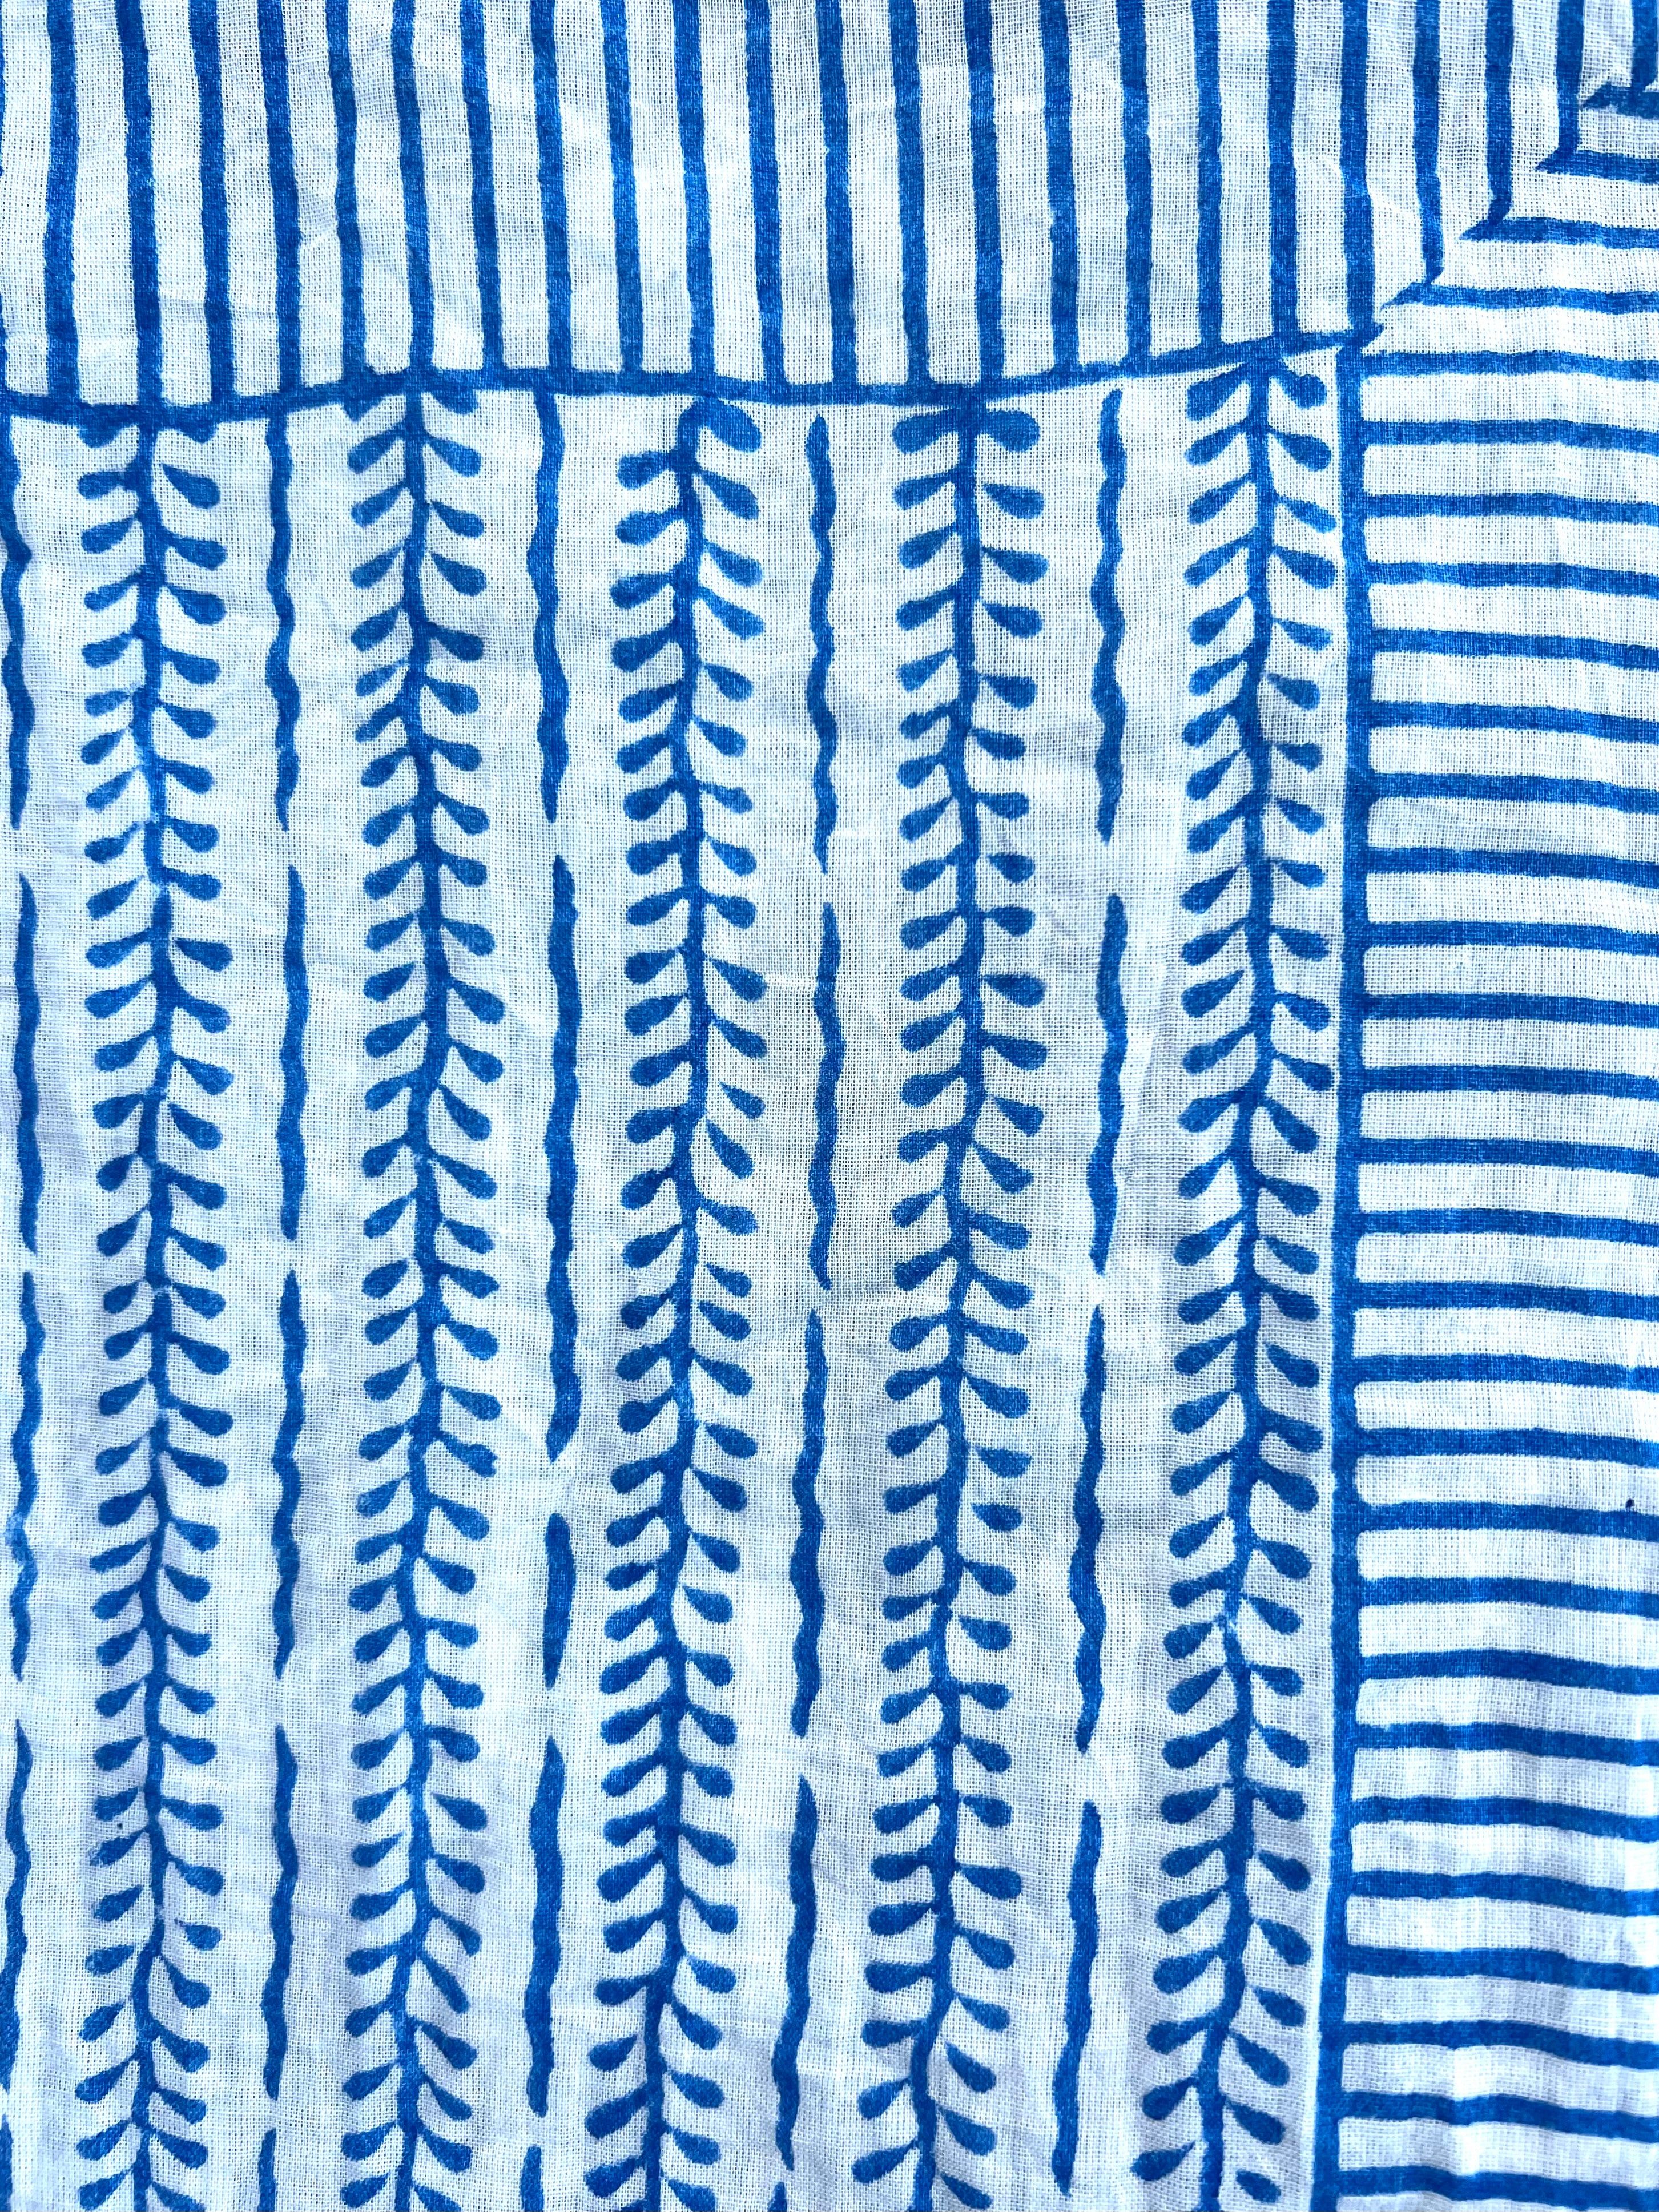 Running Vines Pareo in Egyptian Blue | Christina Dickson Home